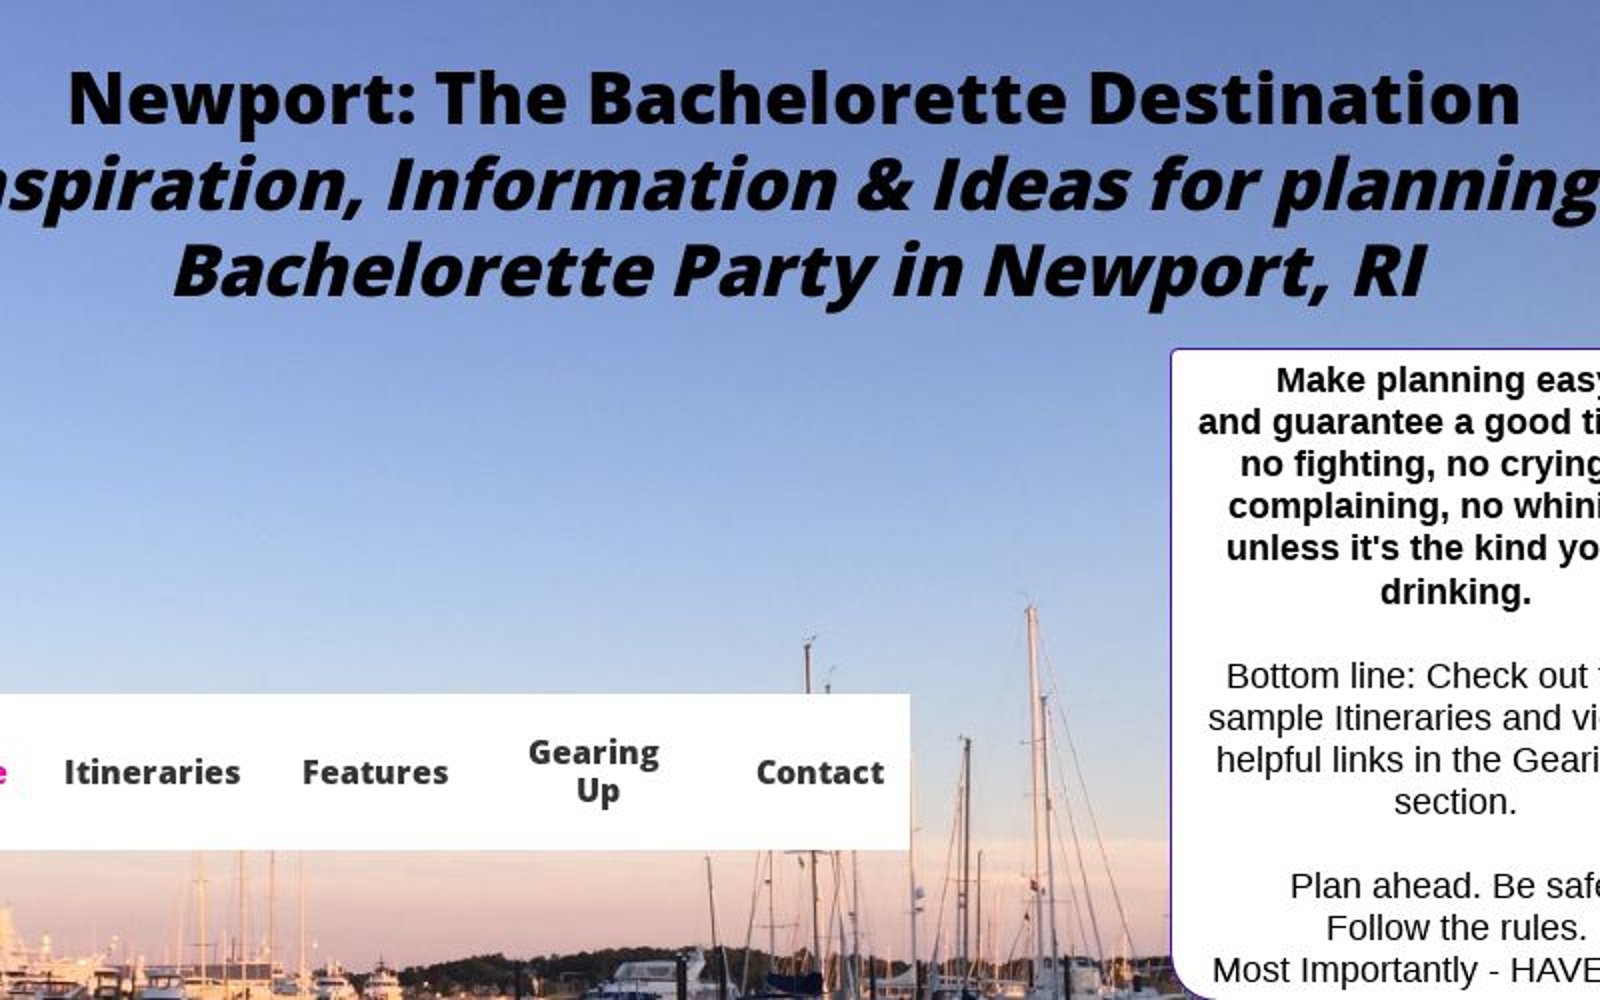 Need advice for activities during bachelor weekend in Newport